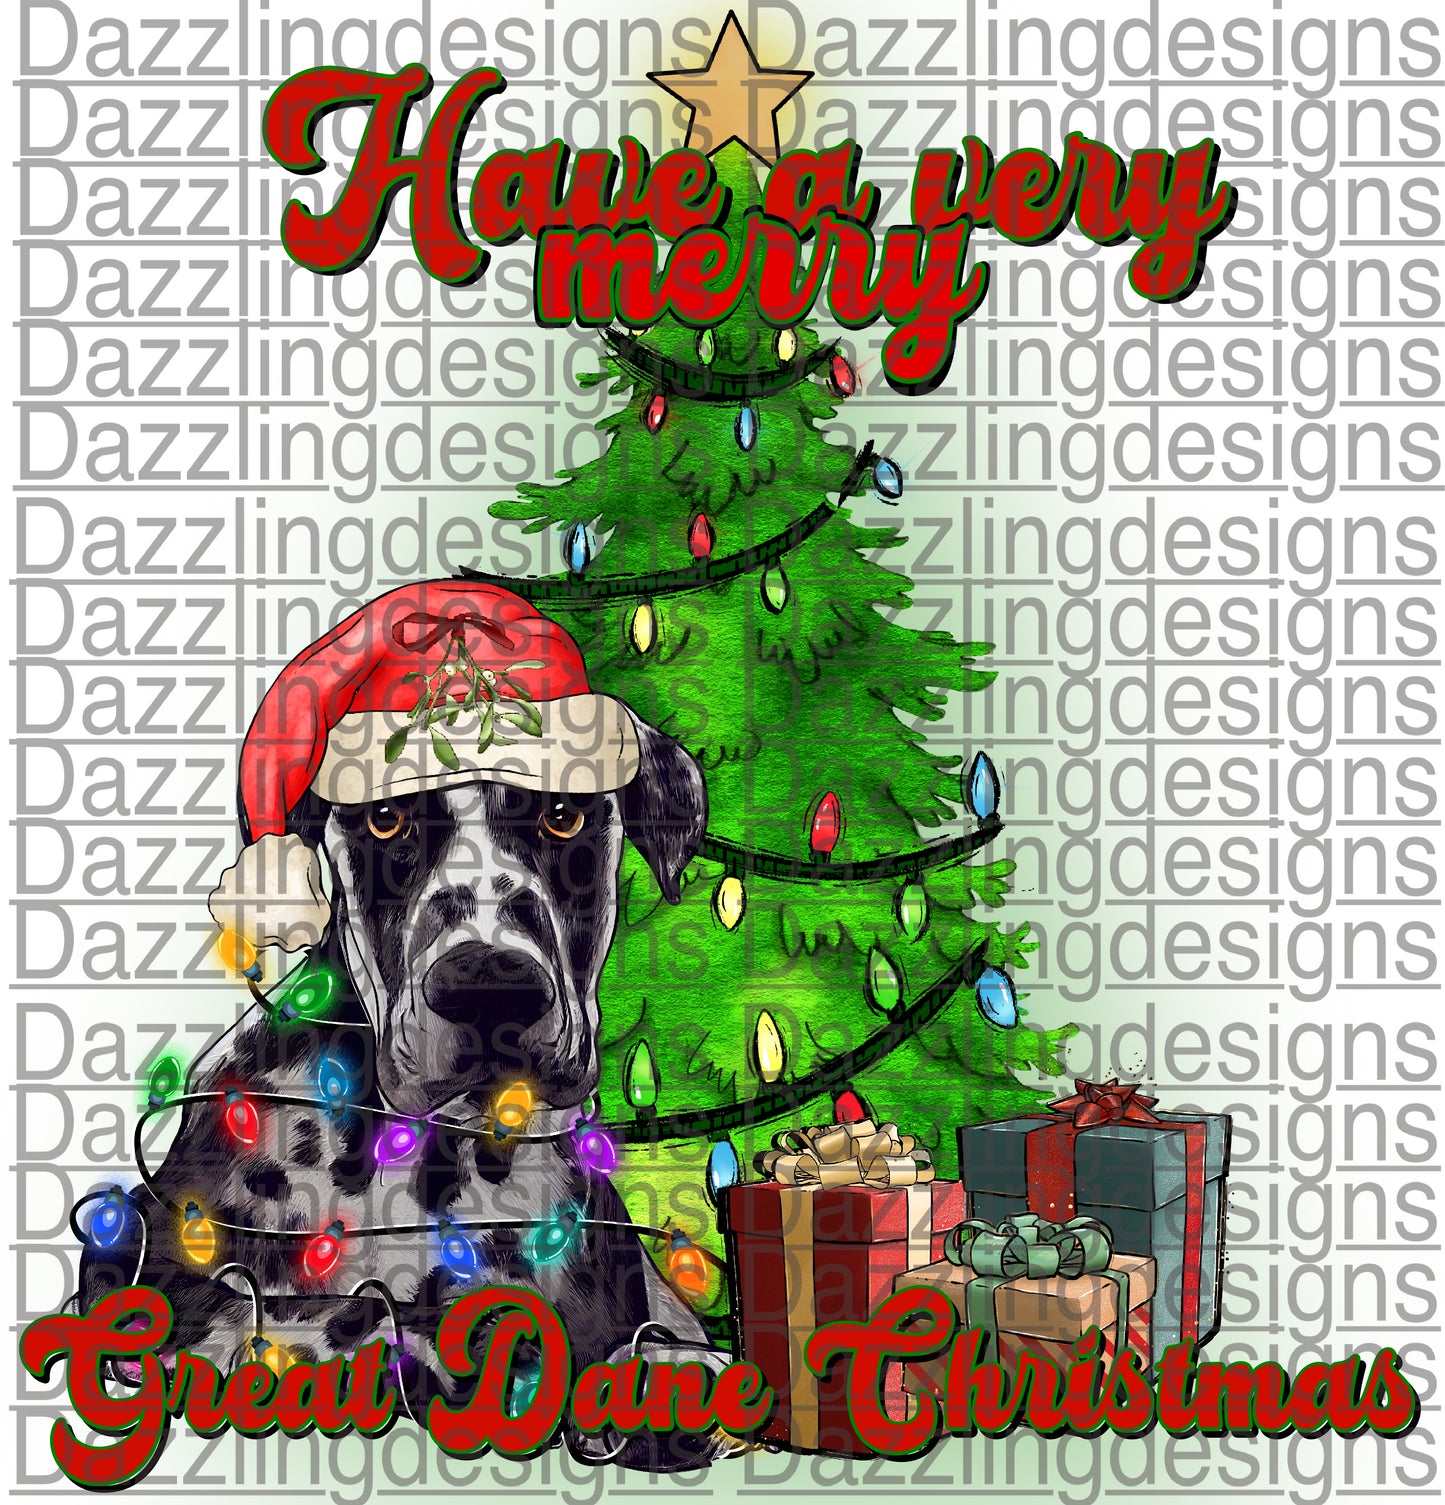 Have a very merry GREAT DANE Christmas